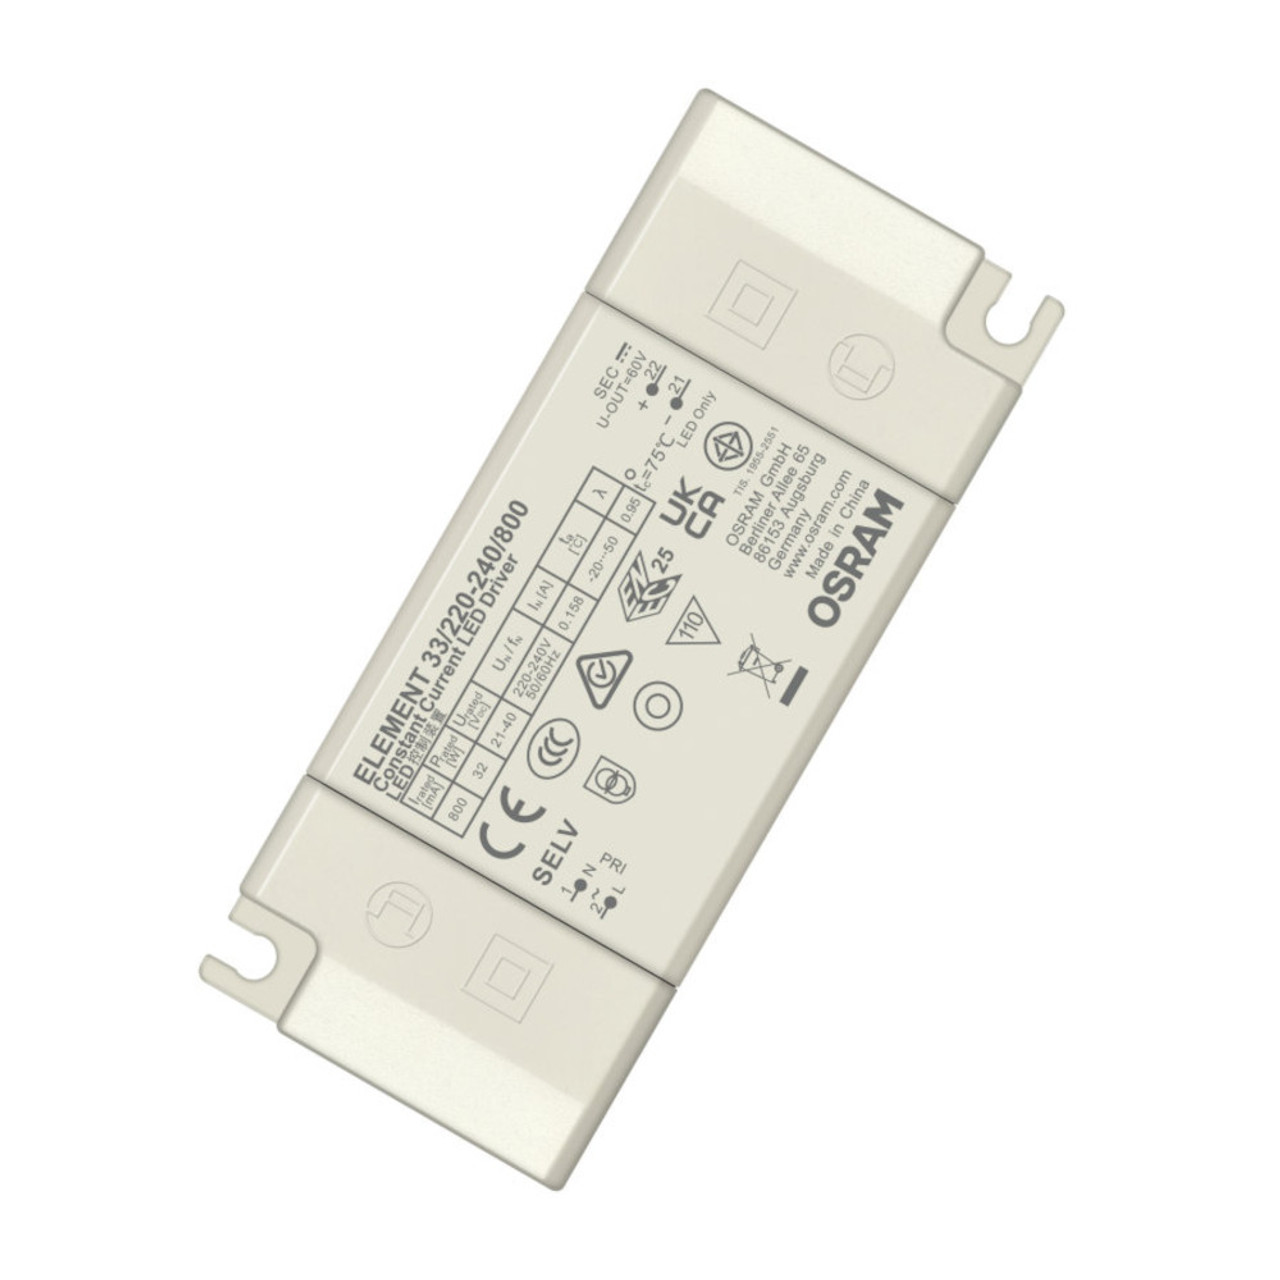 Osram Element G4 33W 800mA Constant Current LED Driver